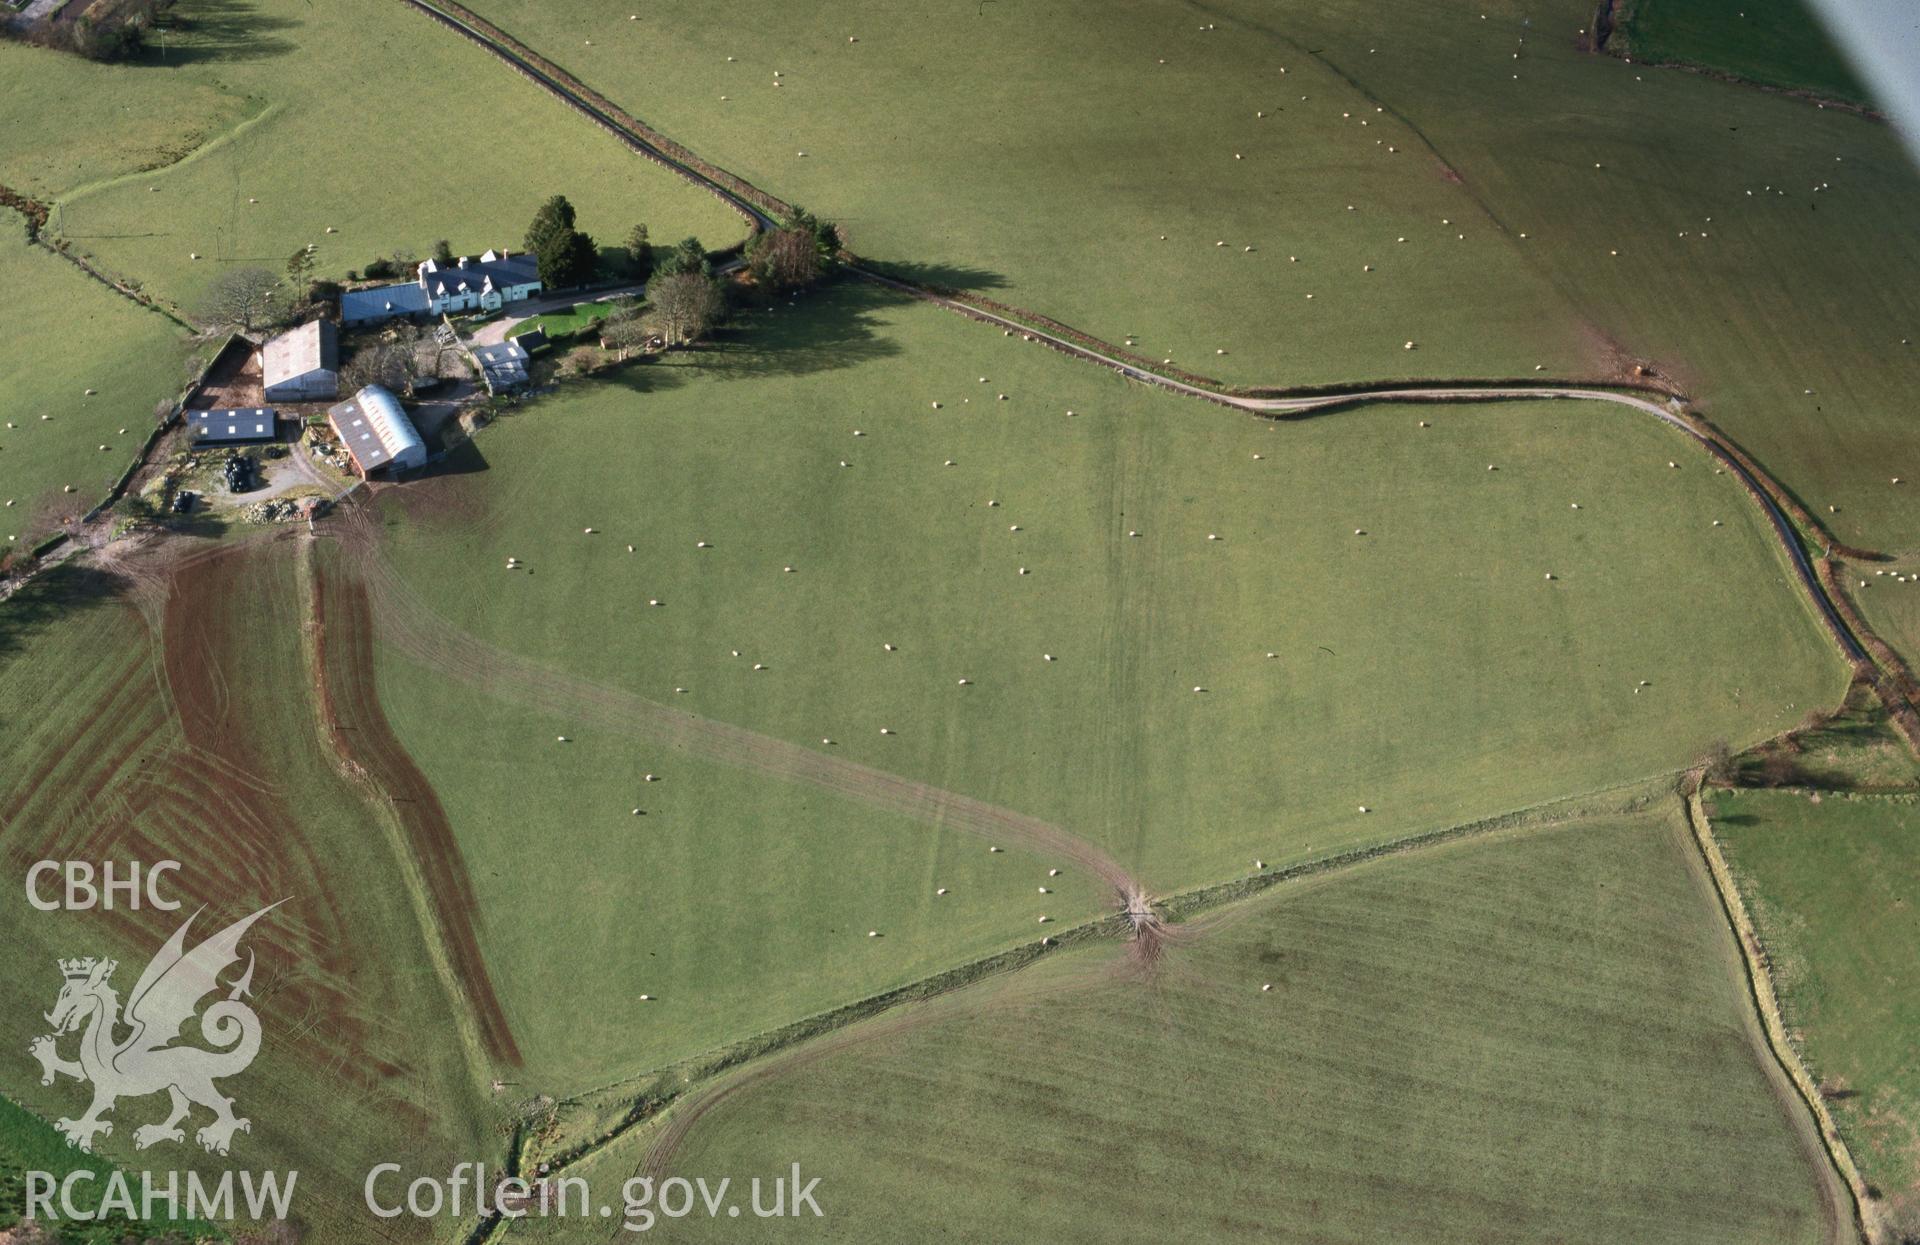 Slide of RCAHMW colour oblique aerial photograph of Cefn Gaer Roman Fort, taken by T.G. Driver, 17/3/1999.